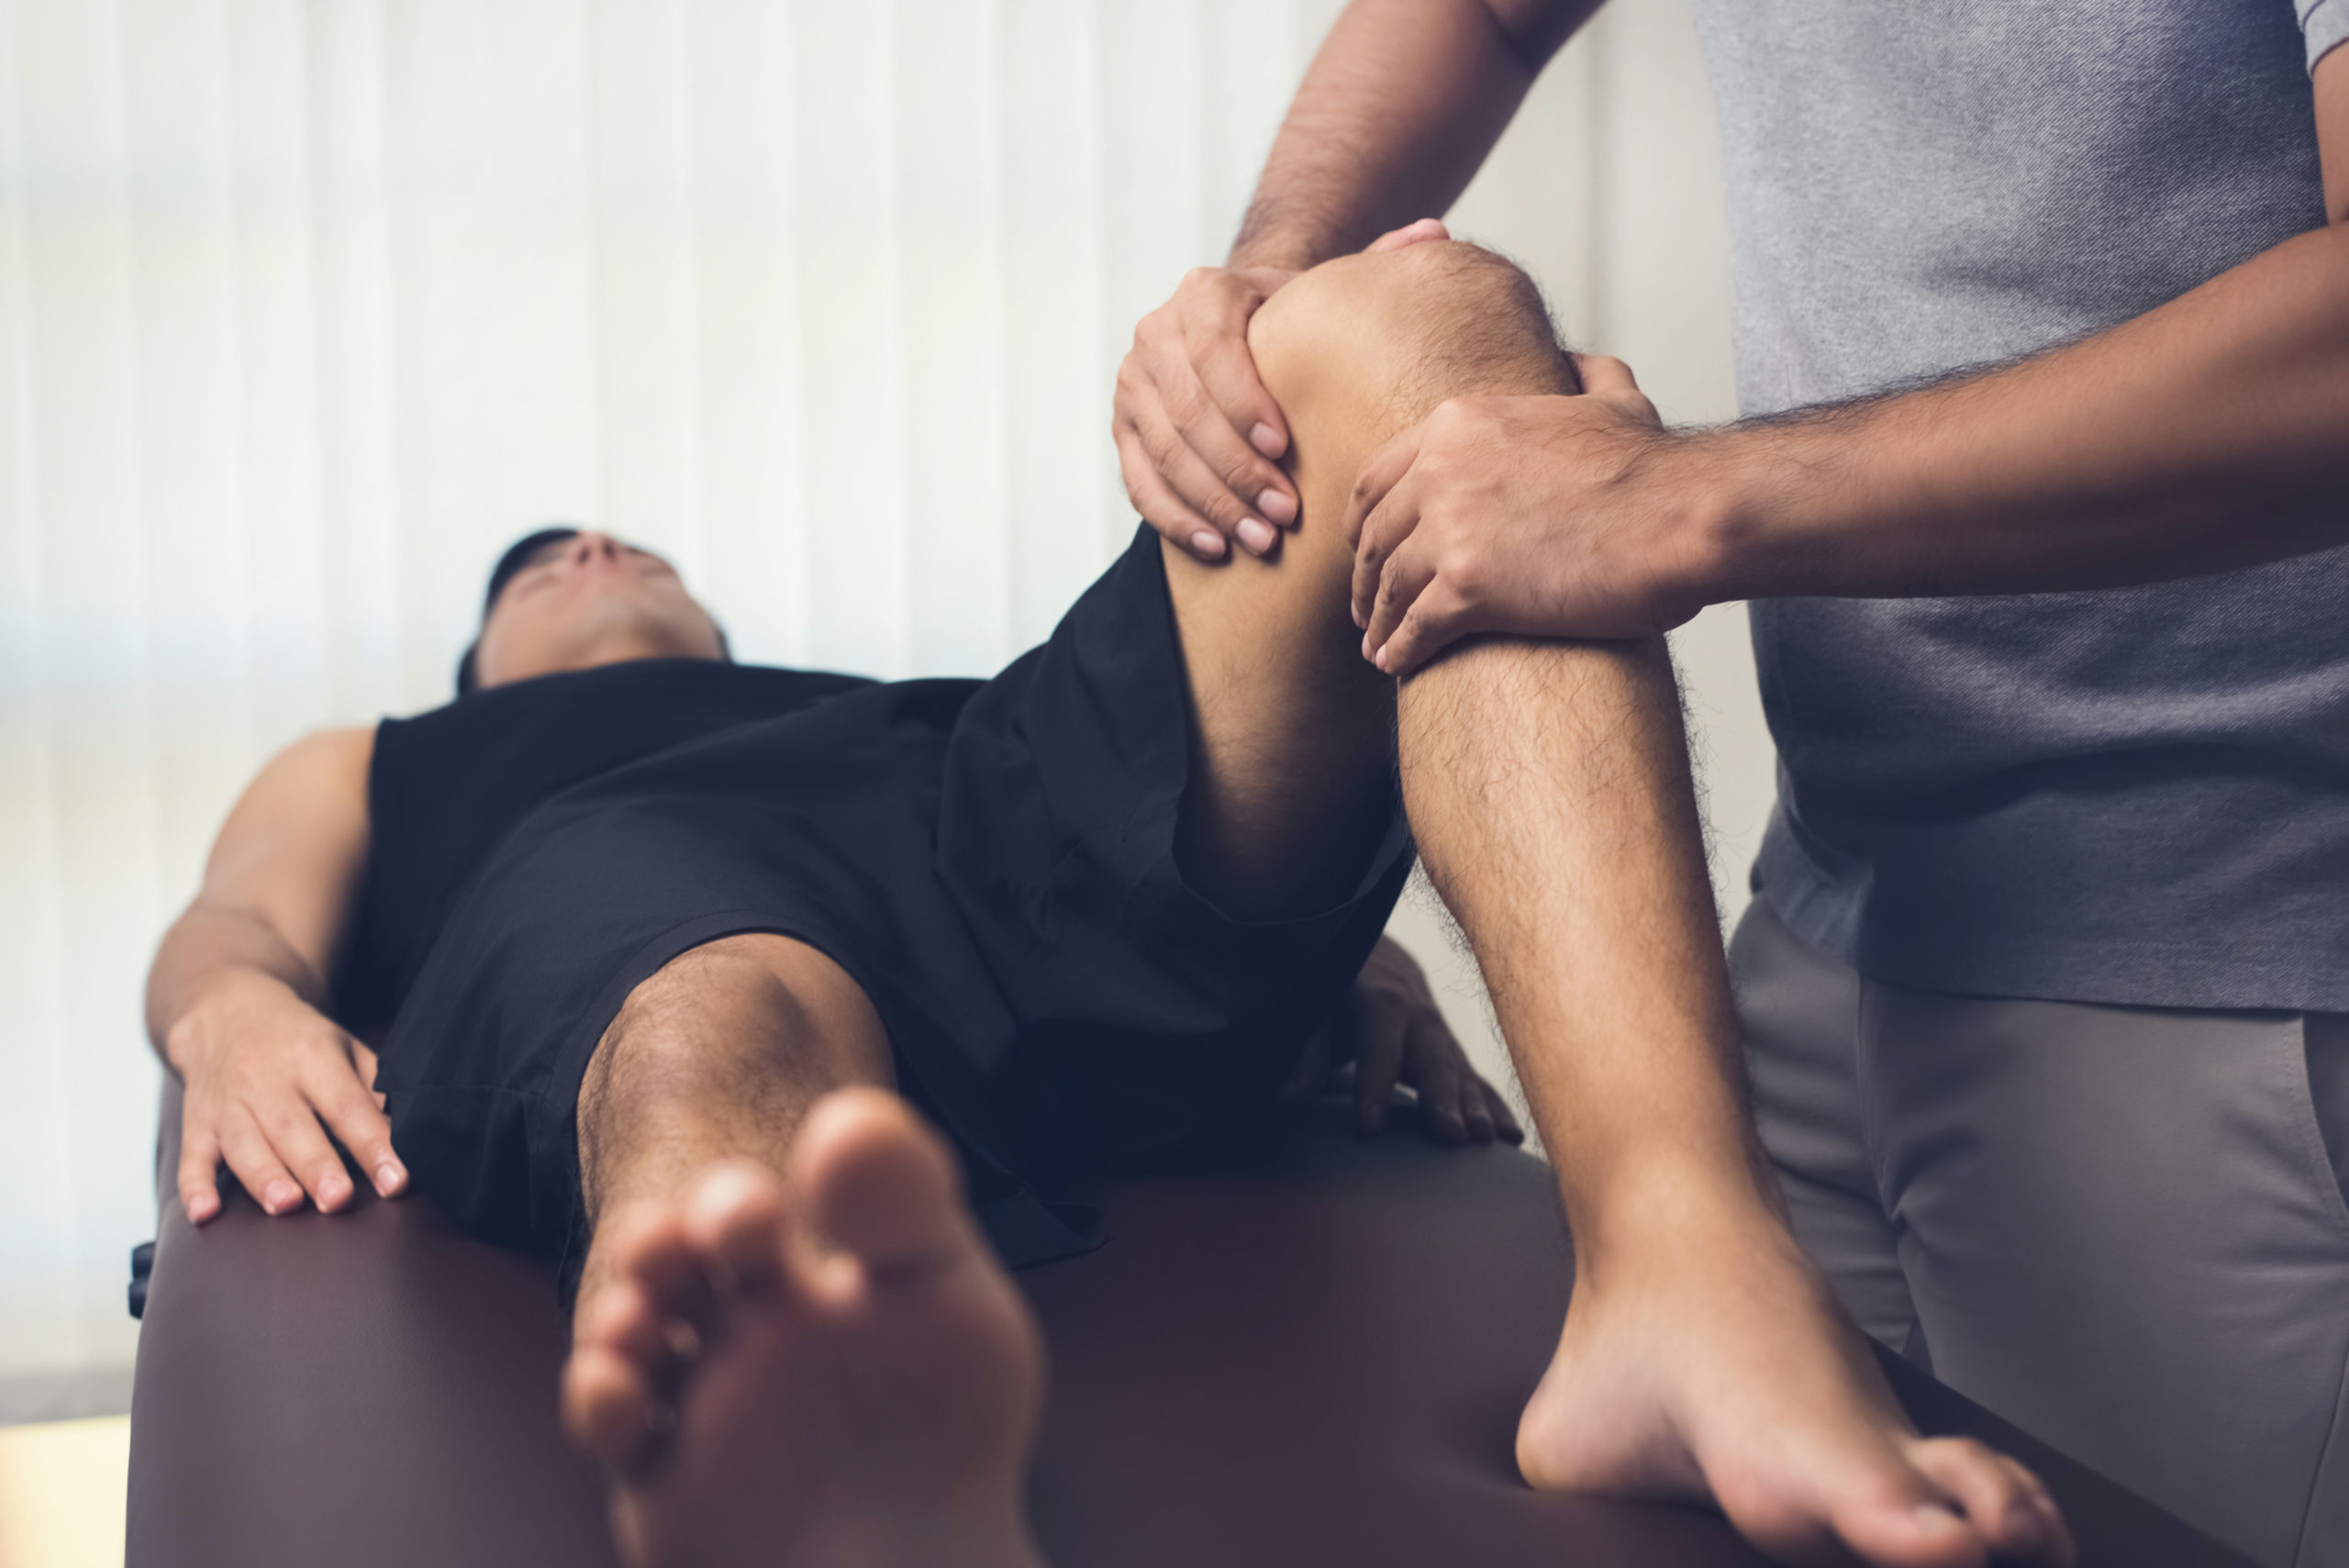 Physio assessing the knee of a patient